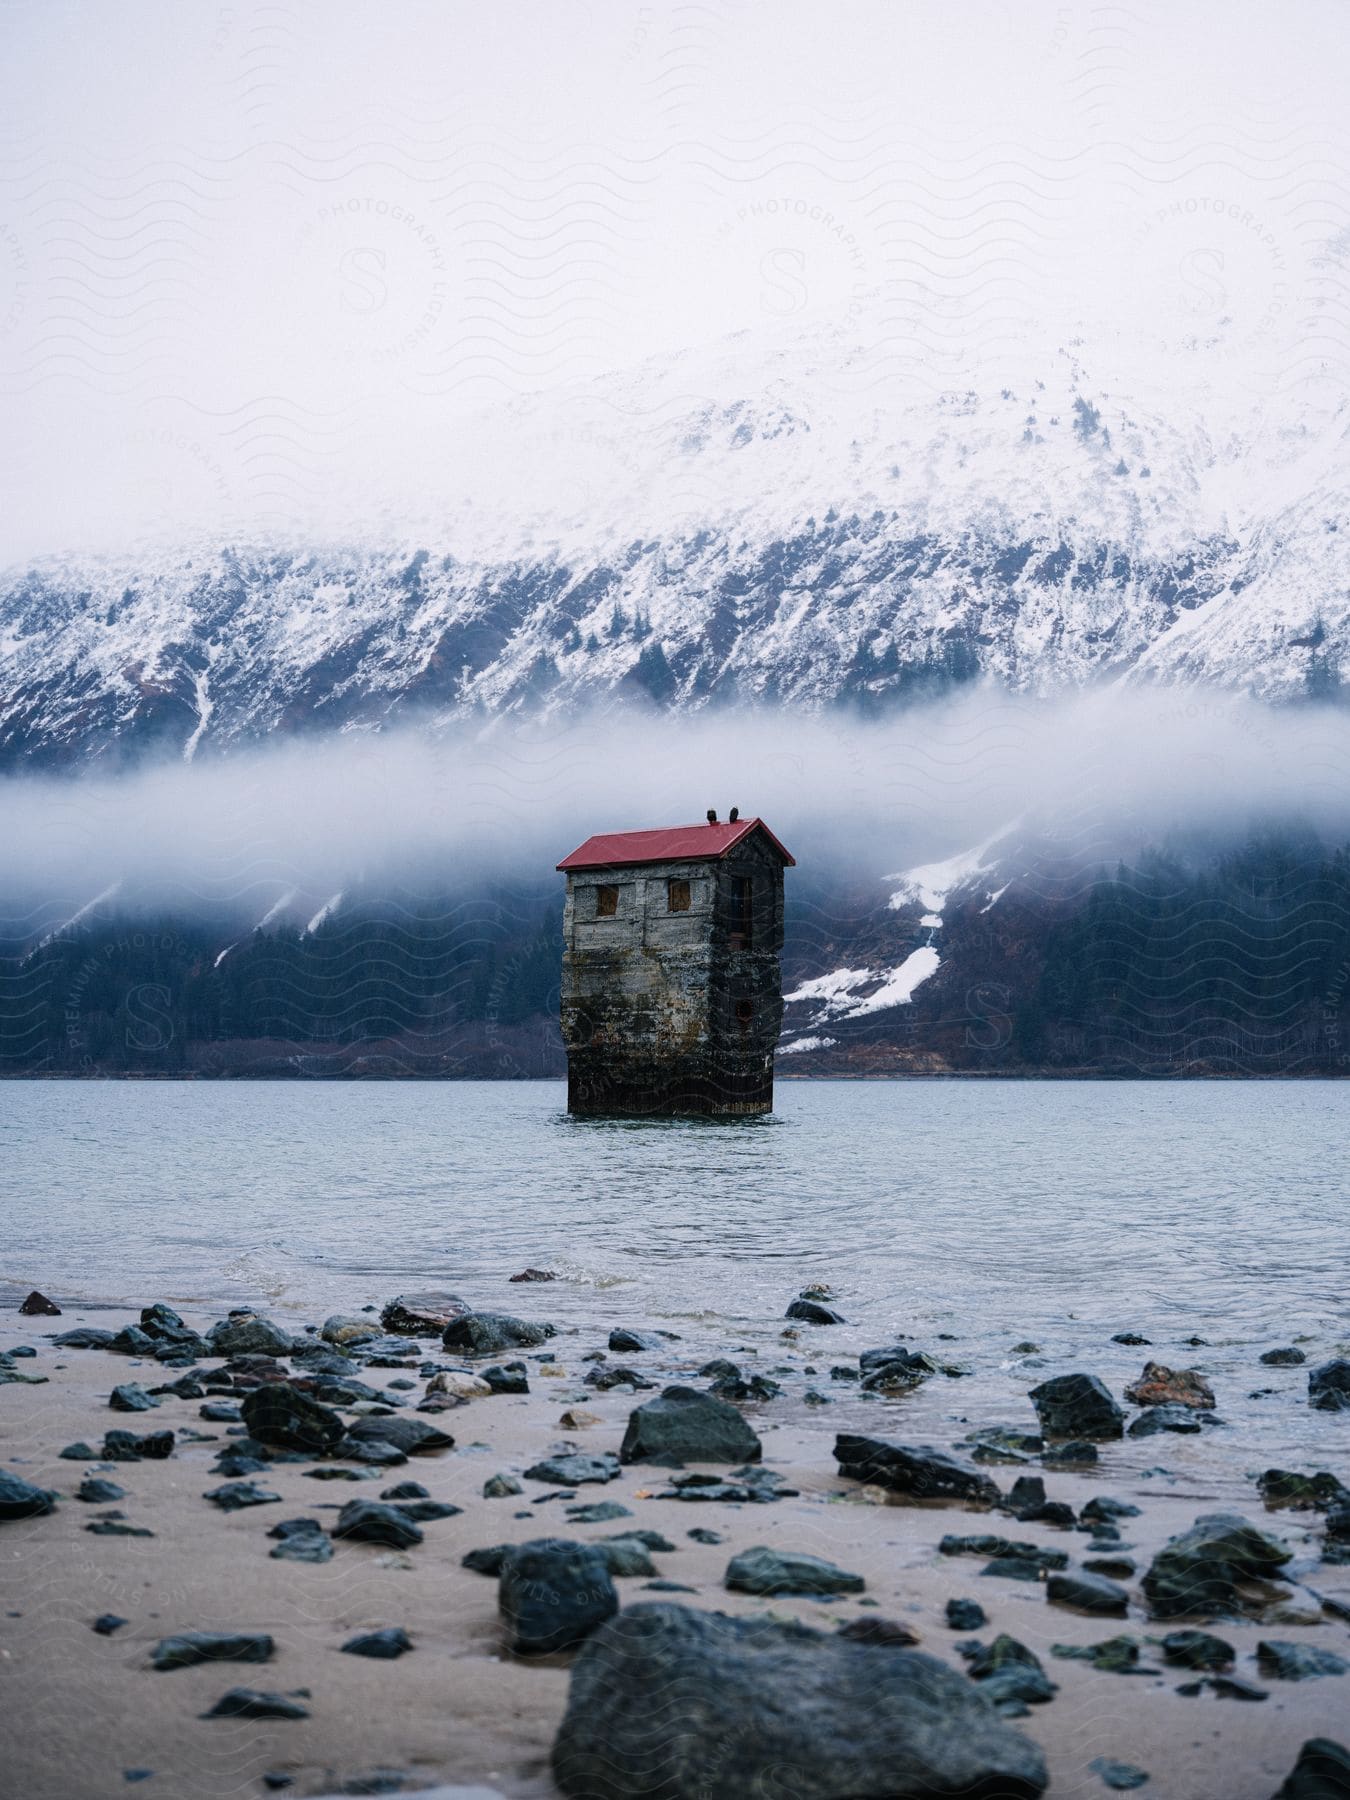 A tall, weathered cabin sits in the middle of a lake with snow-covered mountains in the background.